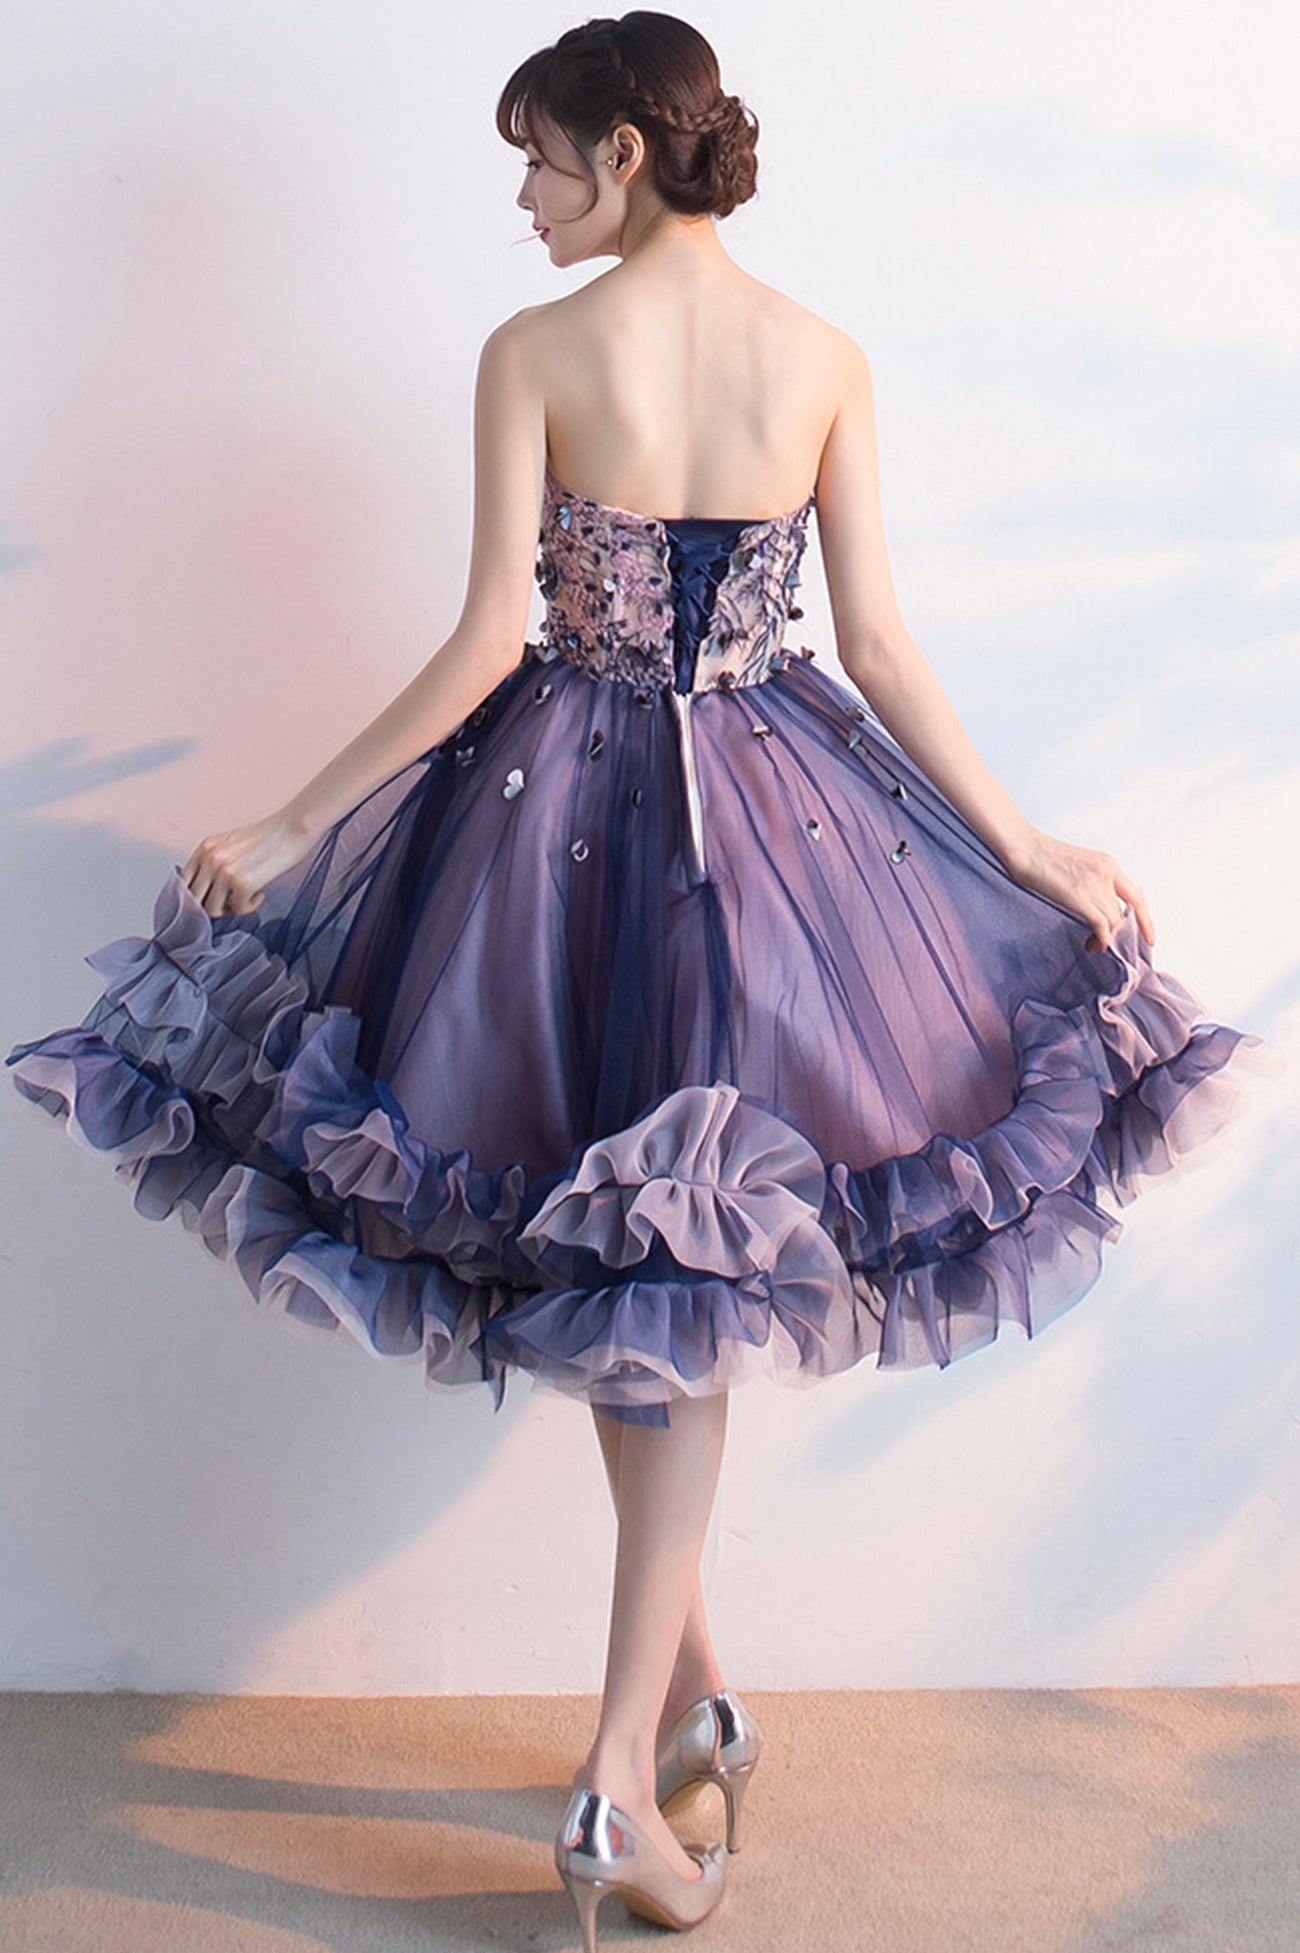 Cute Tulle Short Prom Dress, A-Line Strapless Homecoming Party Dress